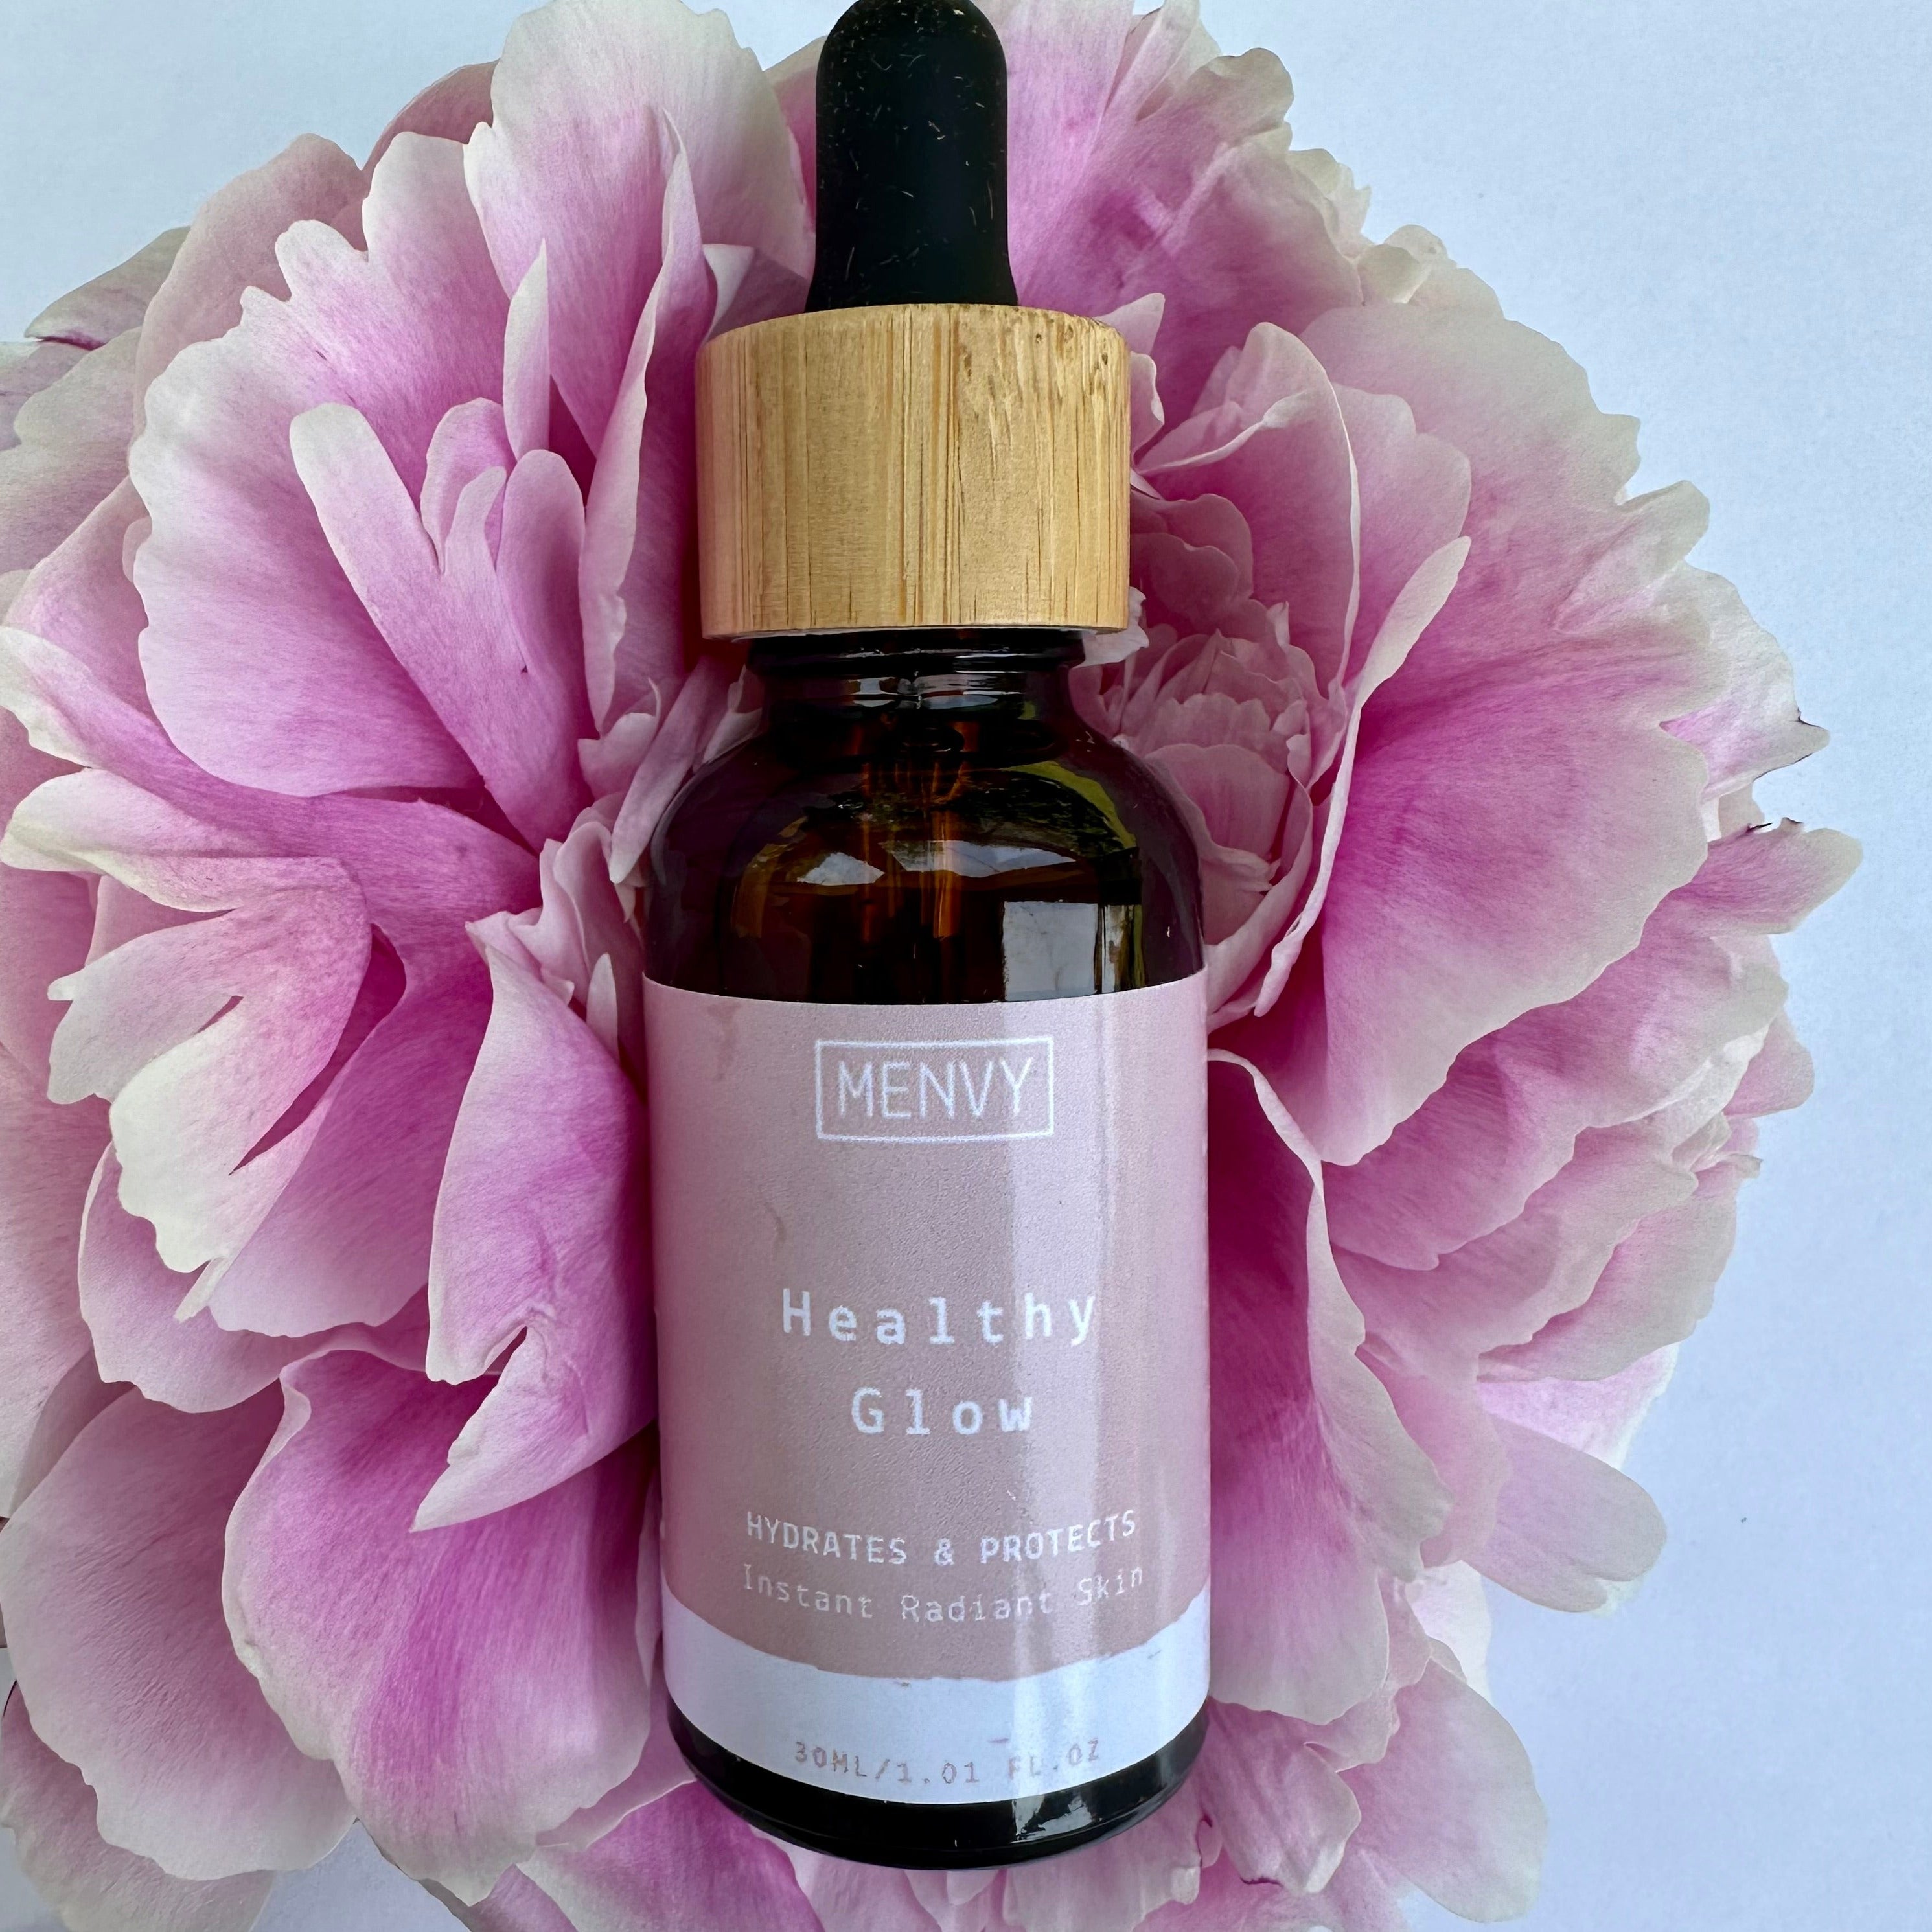 Healthy Glow face serum for menopause skin. Bottle is resting on a pink peony.